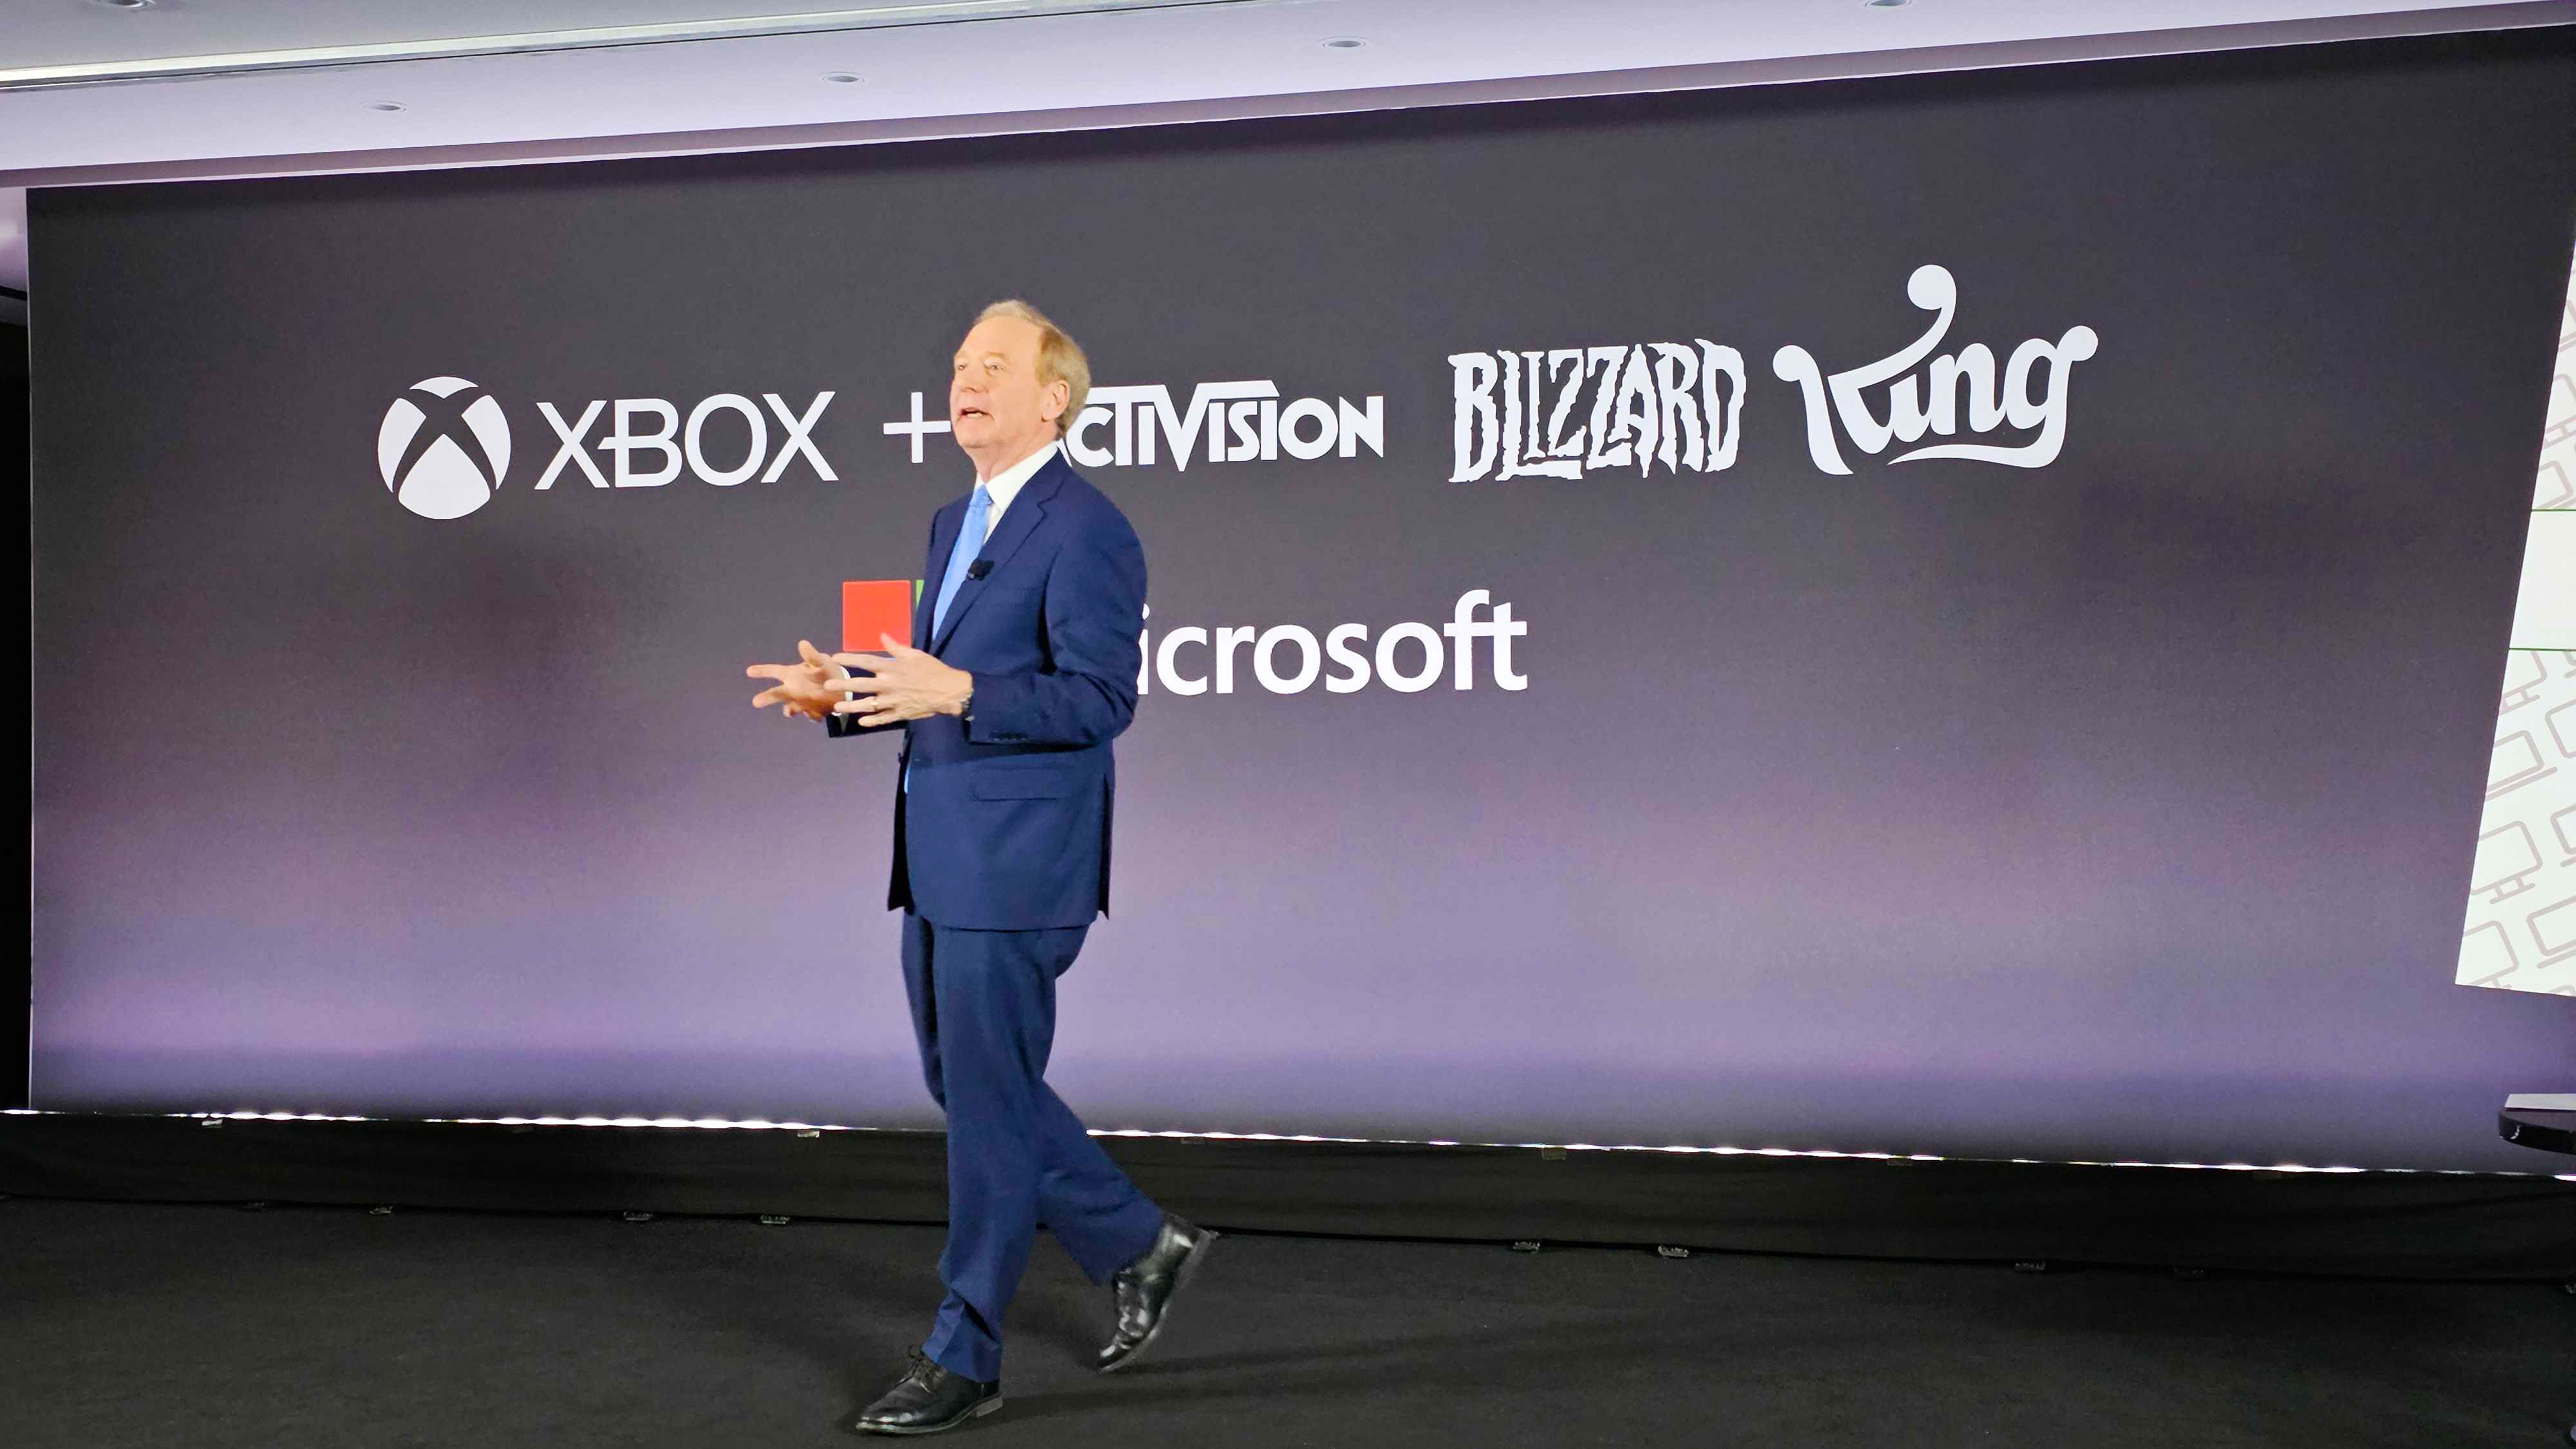 Analysis: Microsoft's regulatory concessions in Activision deal